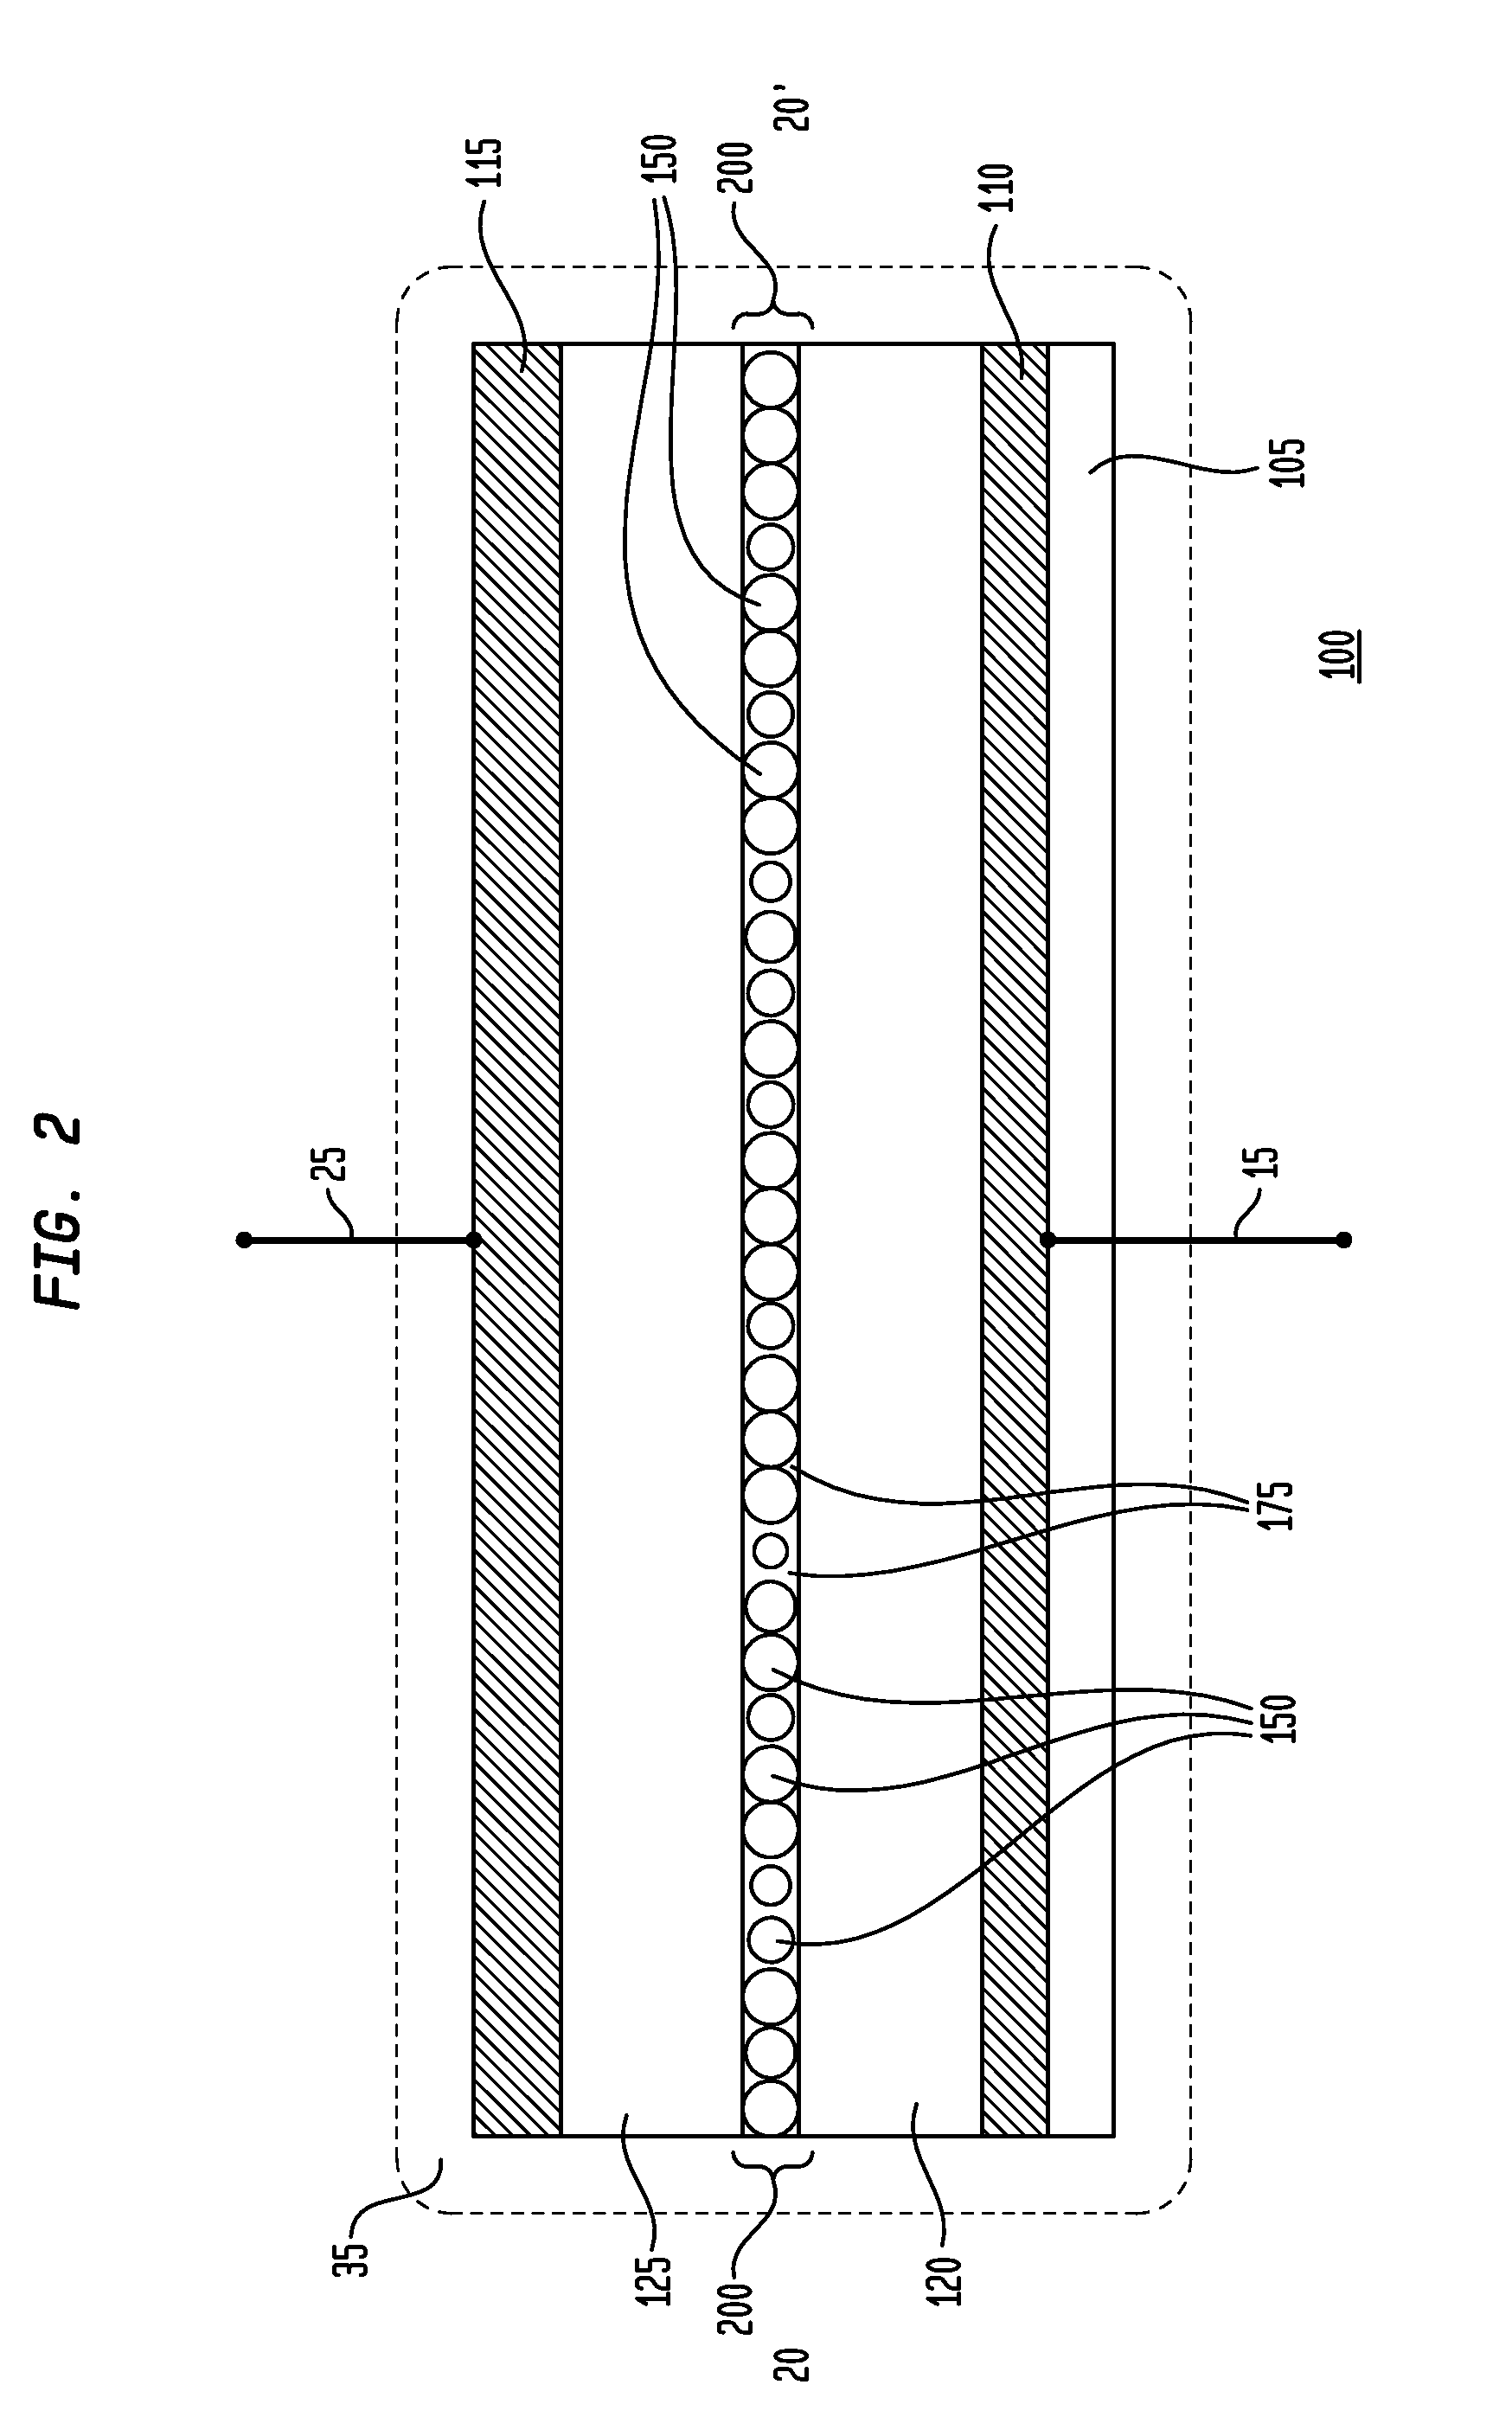 Printable Ionic Gel Separation Layer For Energy Storage Devices